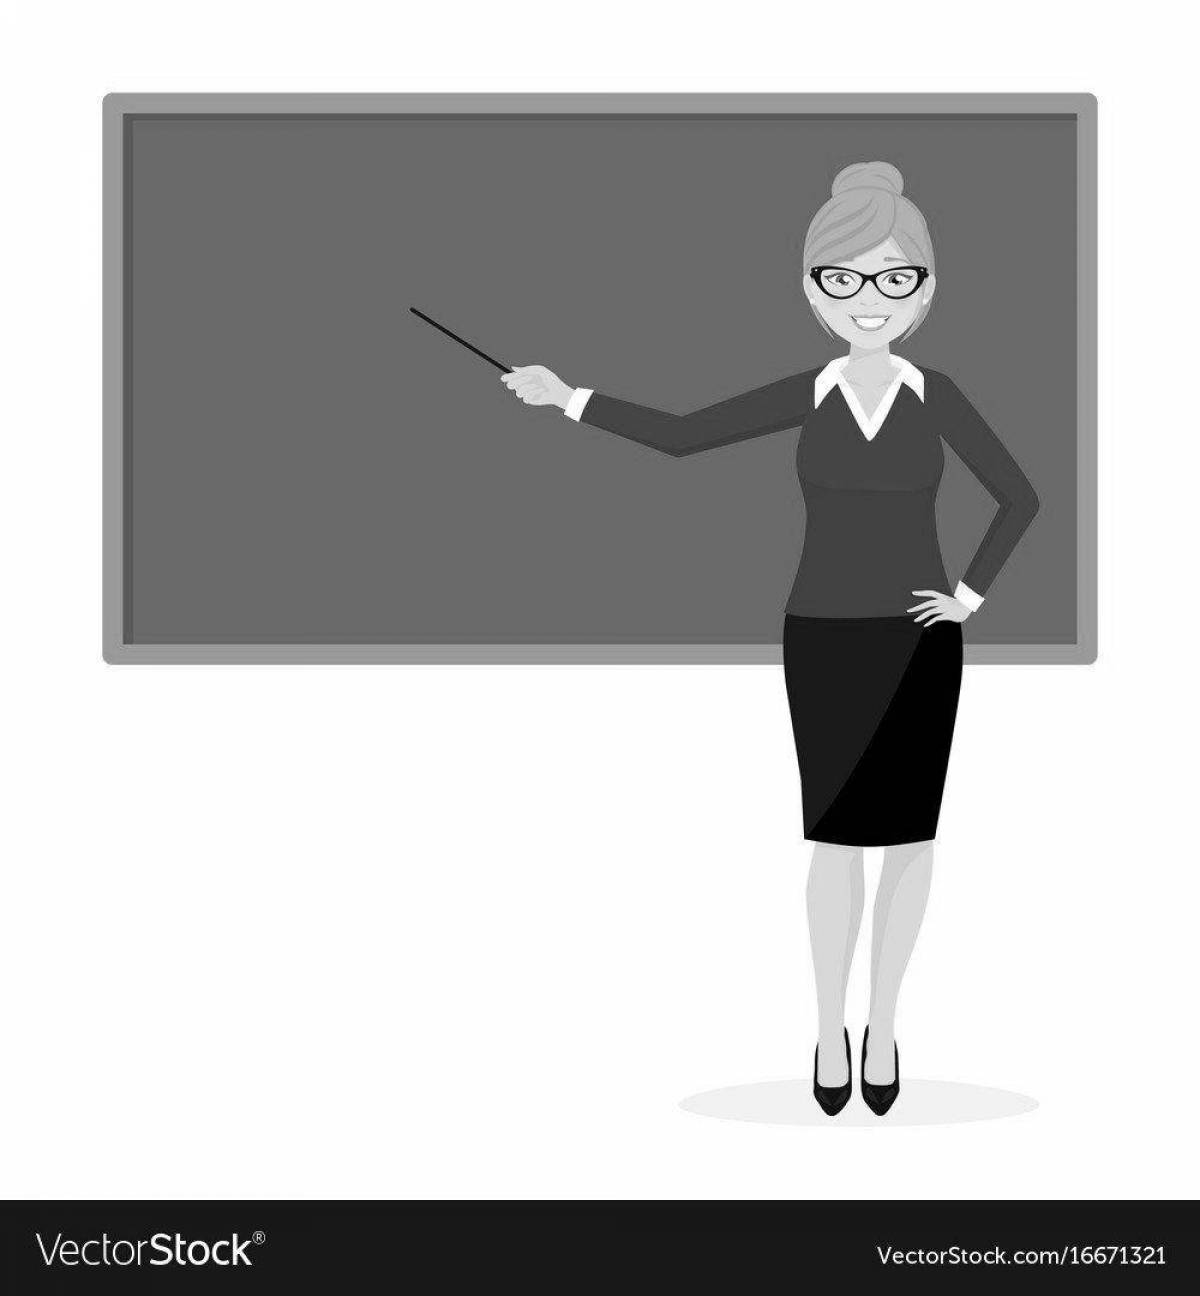 Animation teacher at the blackboard with a pointer